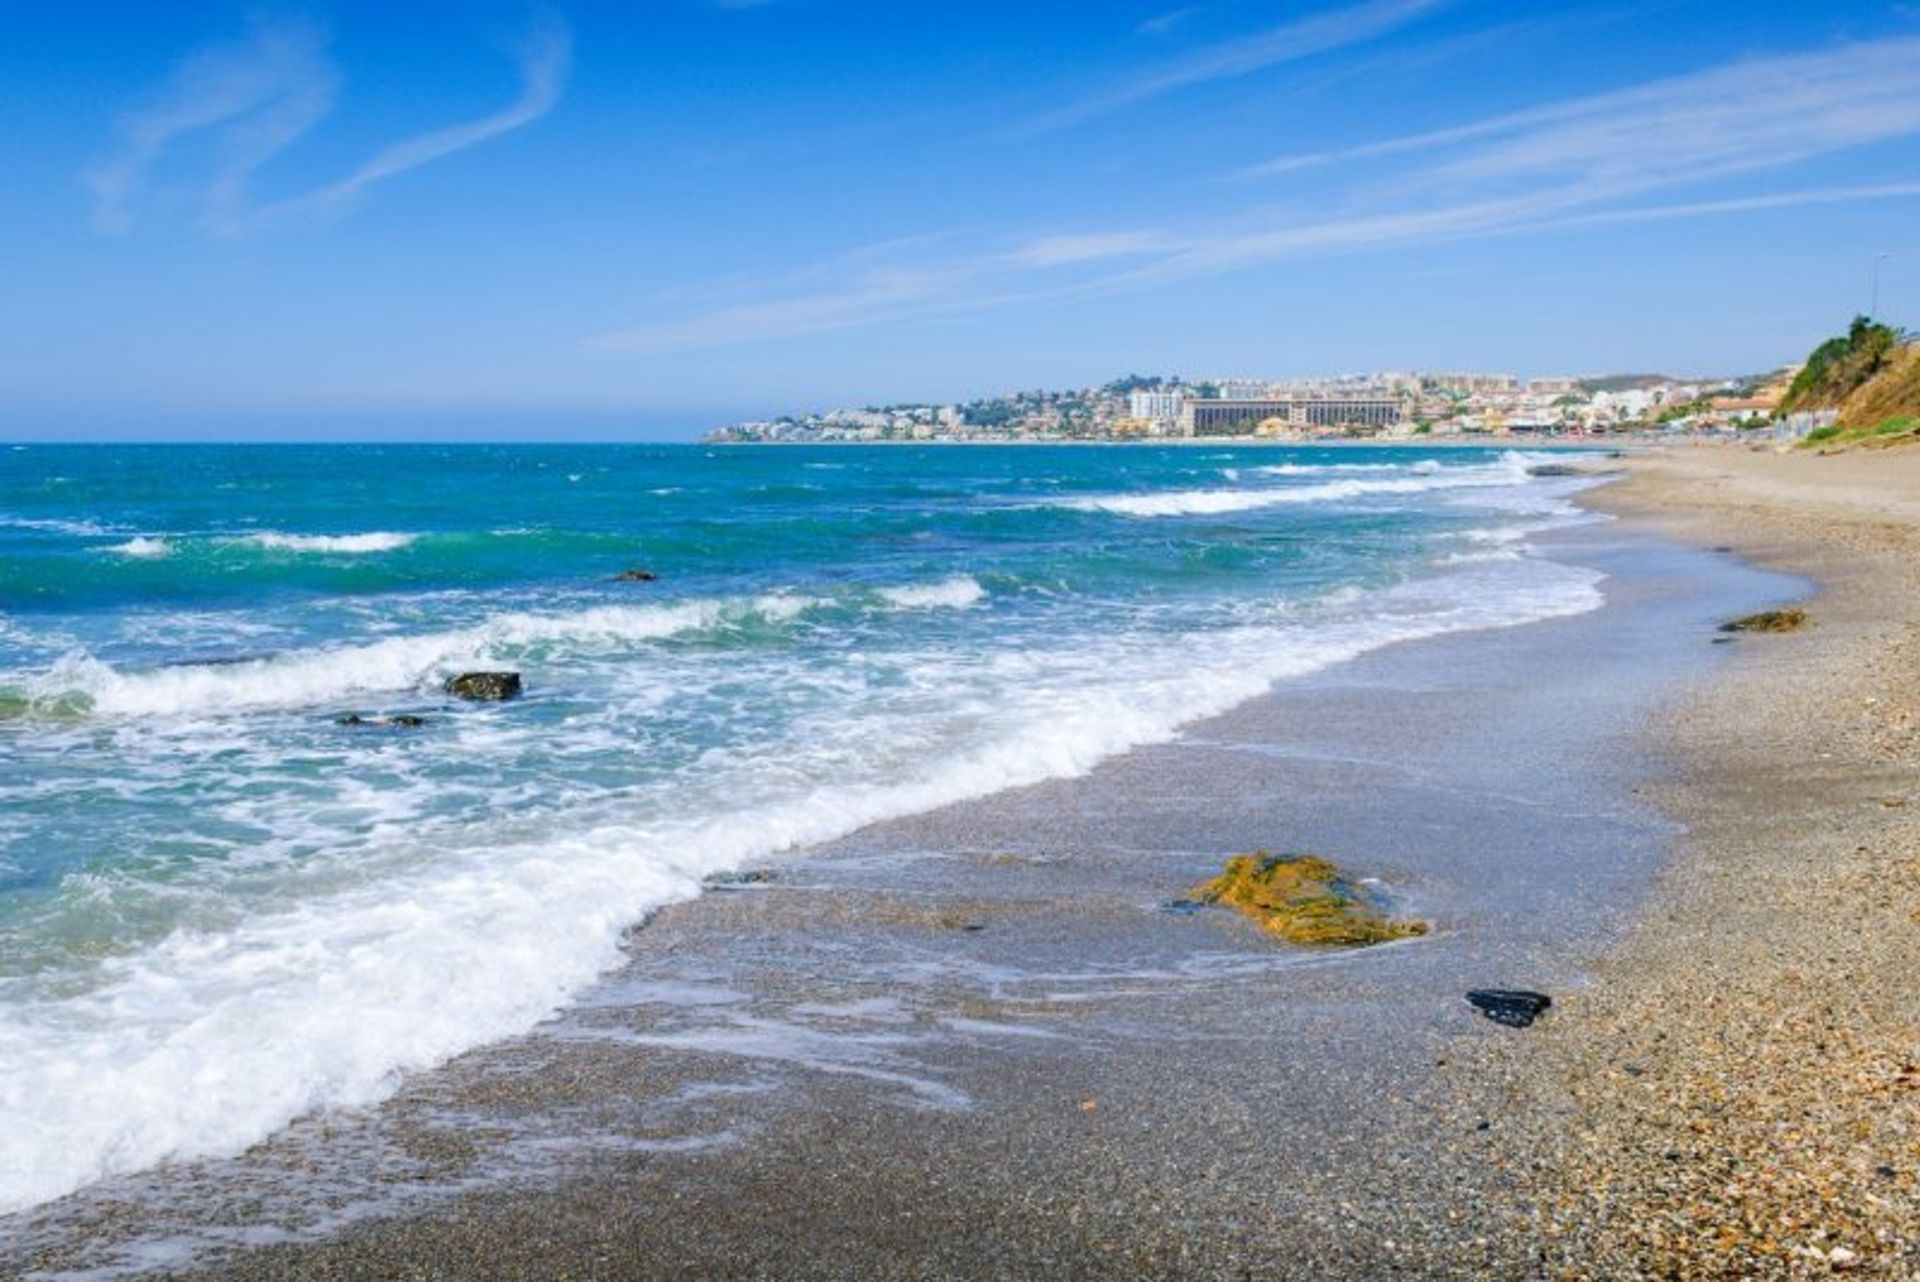 Boasting golden sands and aquamarine waters, neighbouring Mijas beach is favourite with families and sun-worshippers